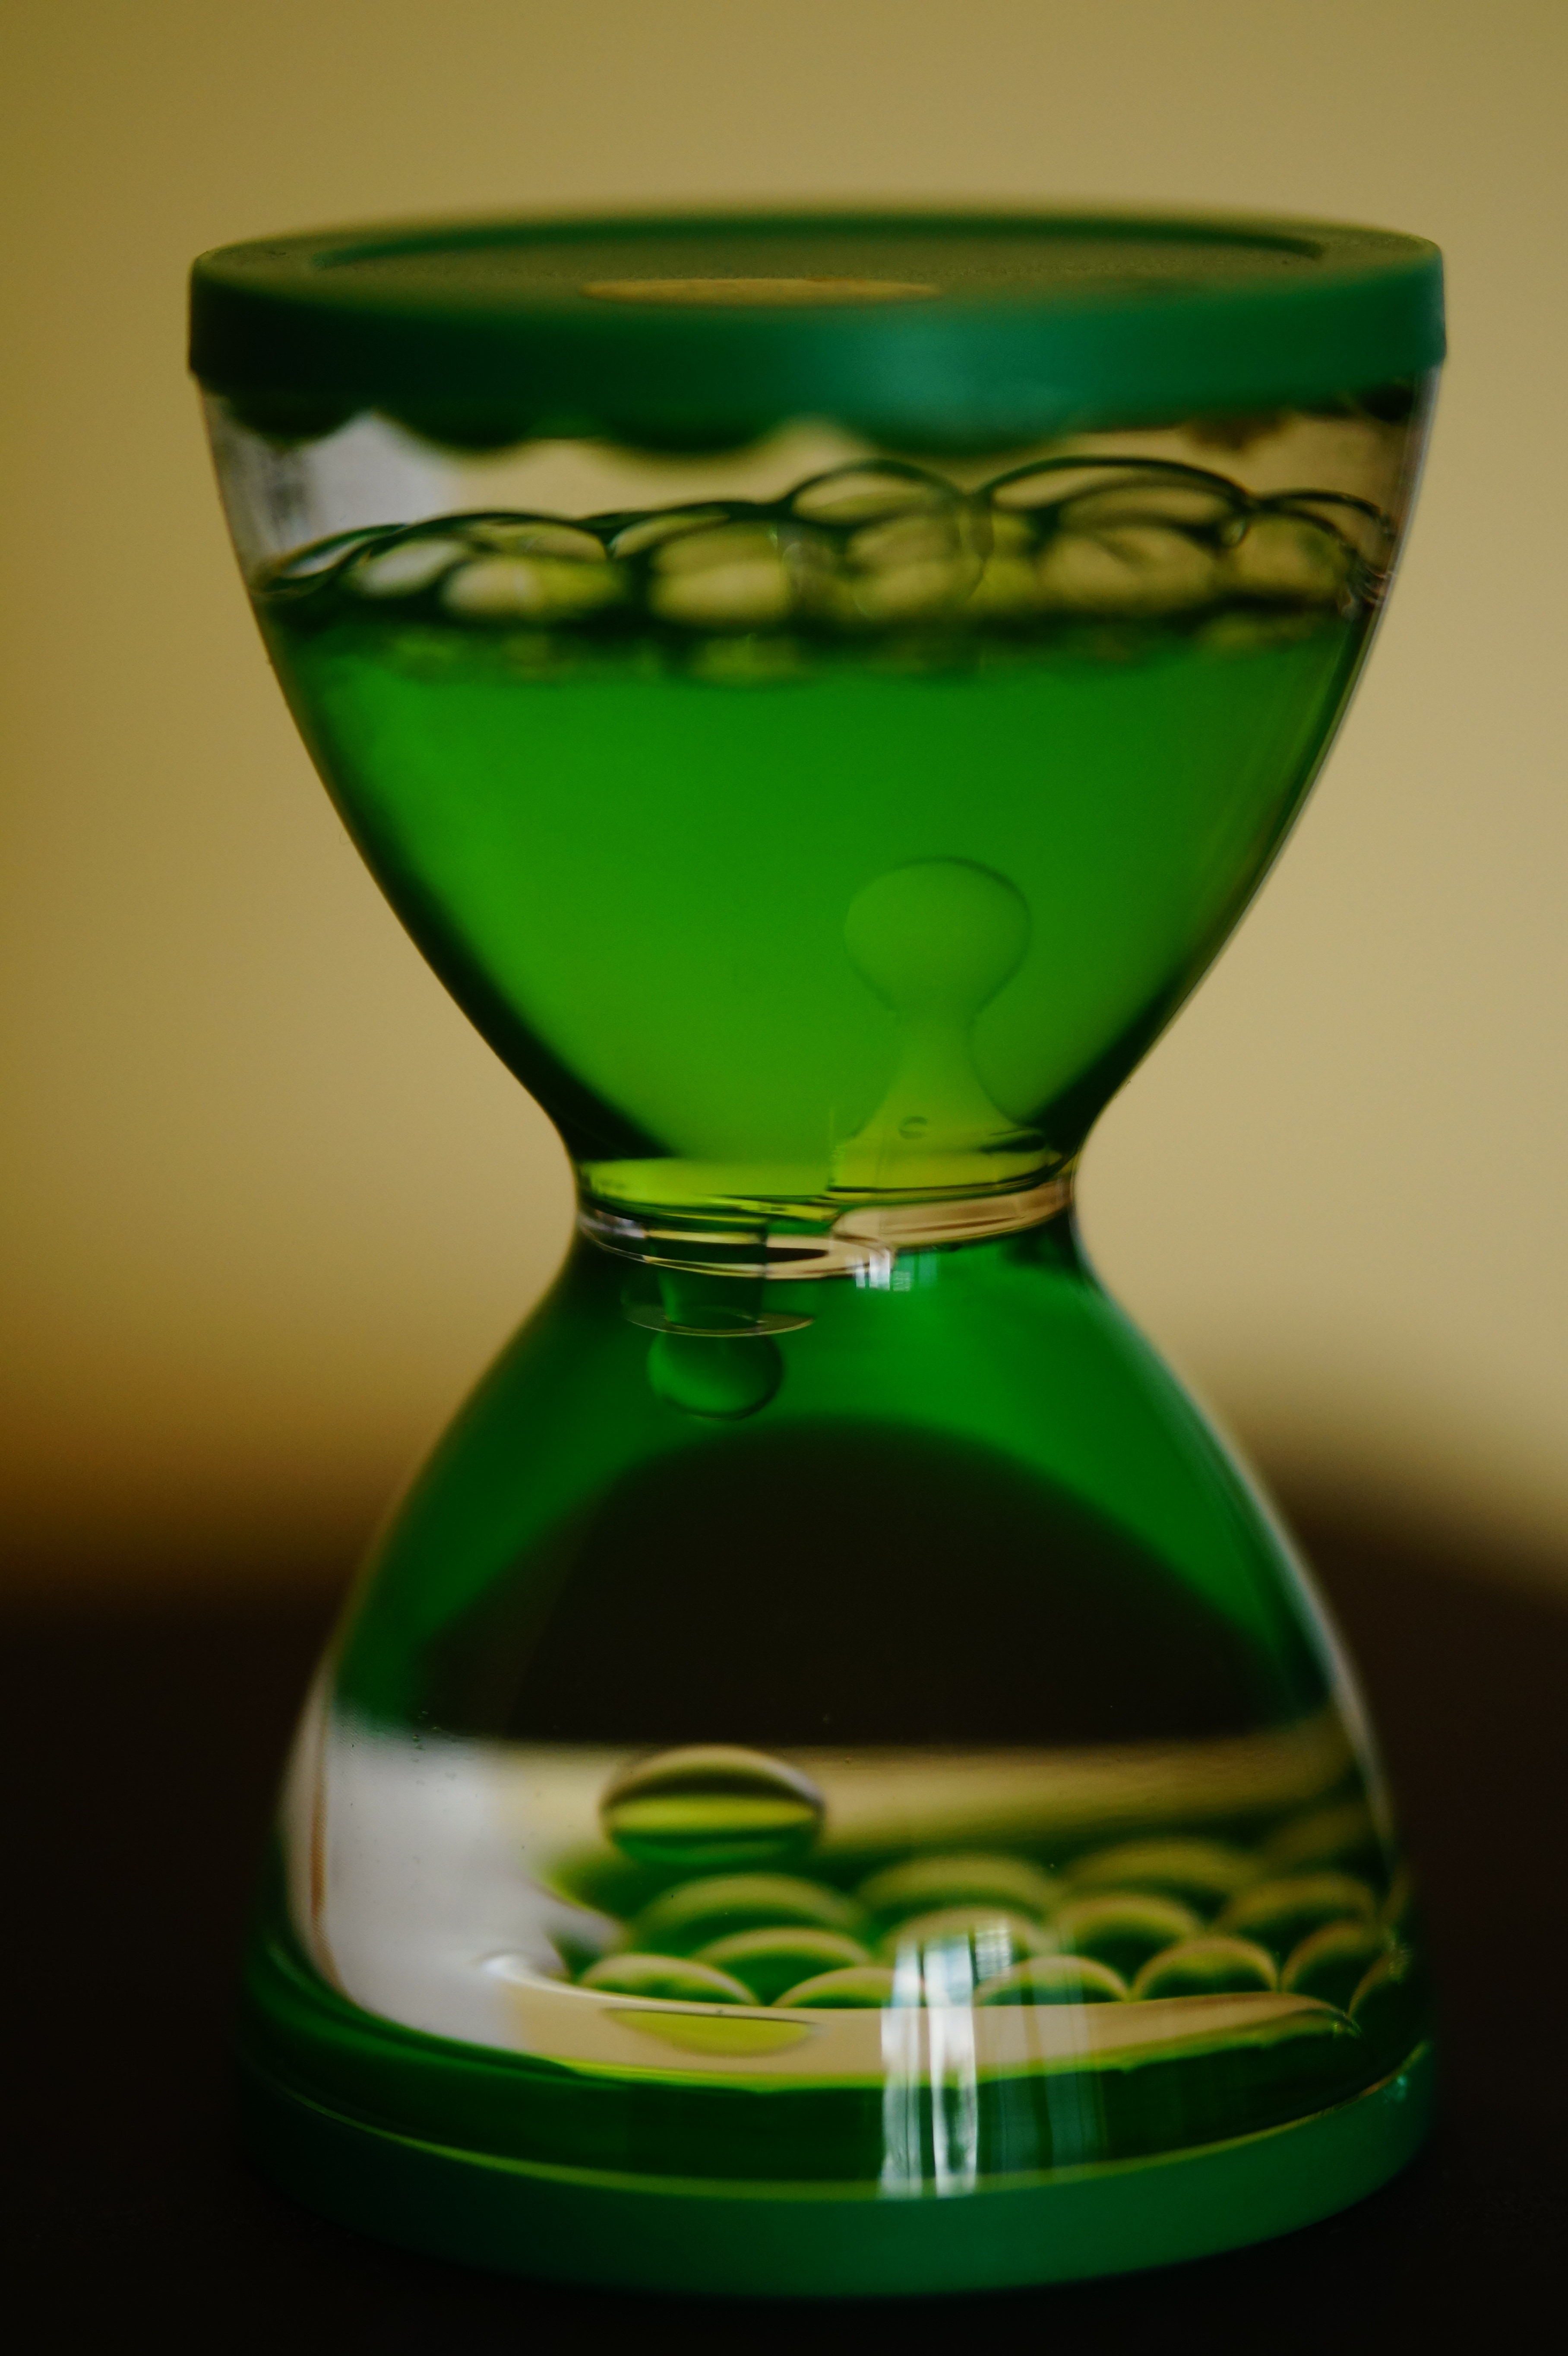 green tinted hourglass design ornament